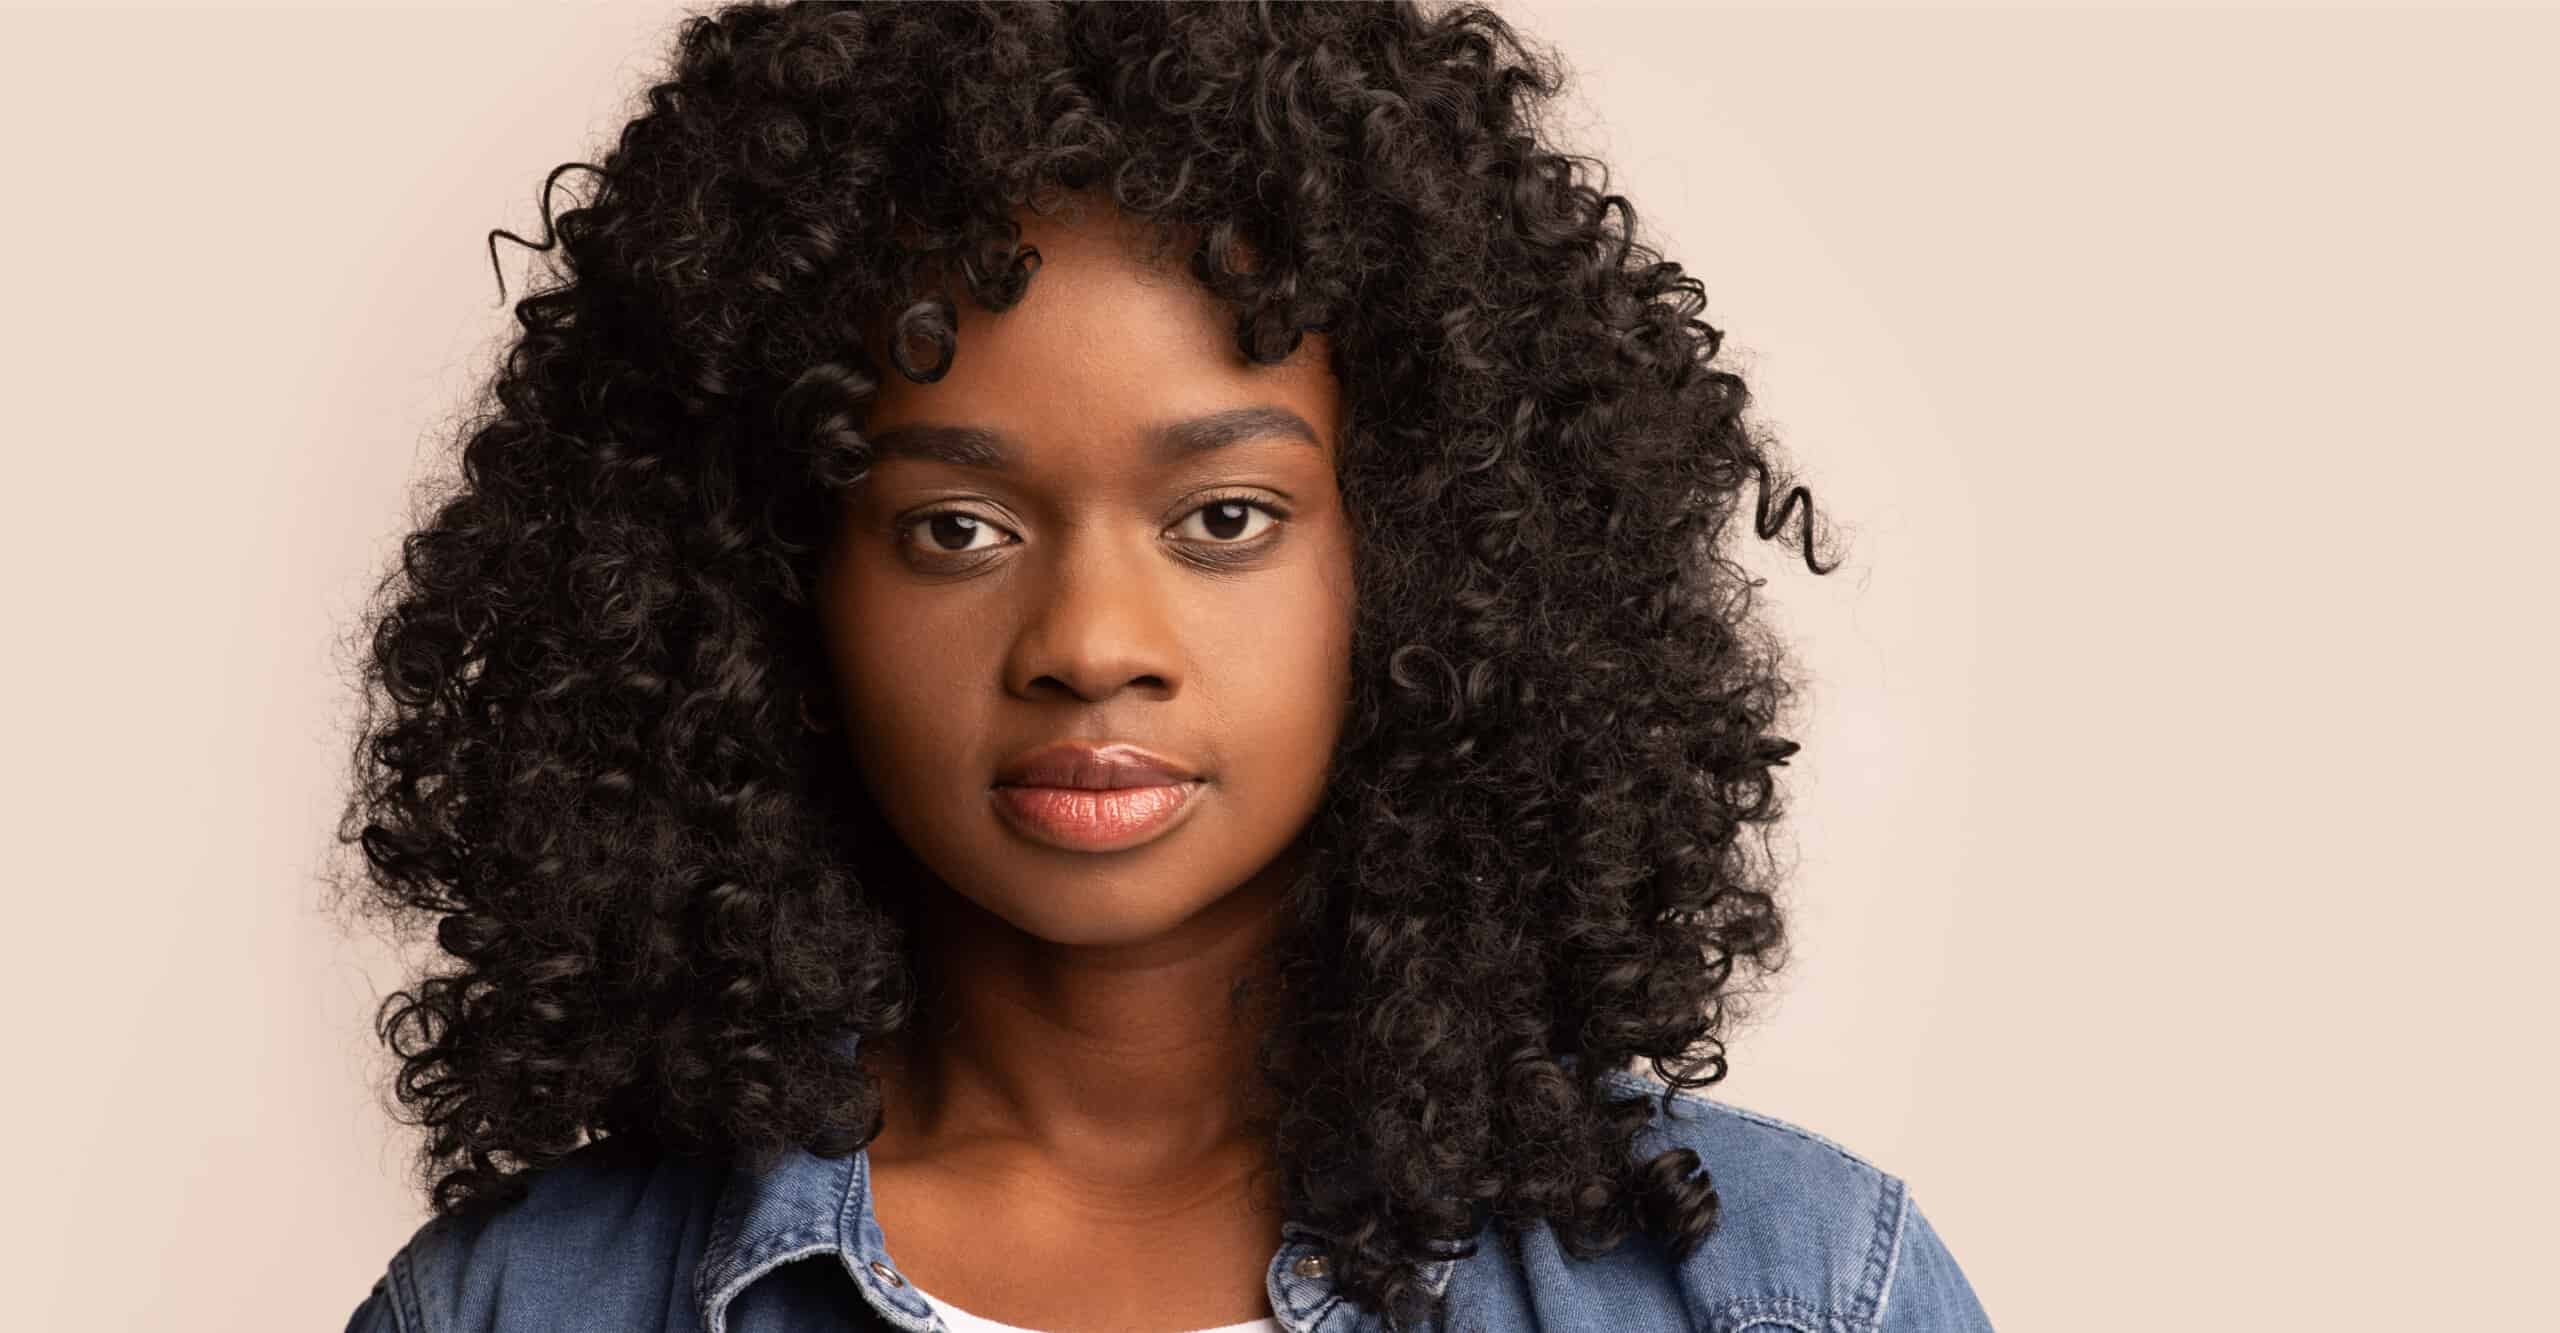 How Much Is a Perm? Your Guide to Costs and More - StyleSeat